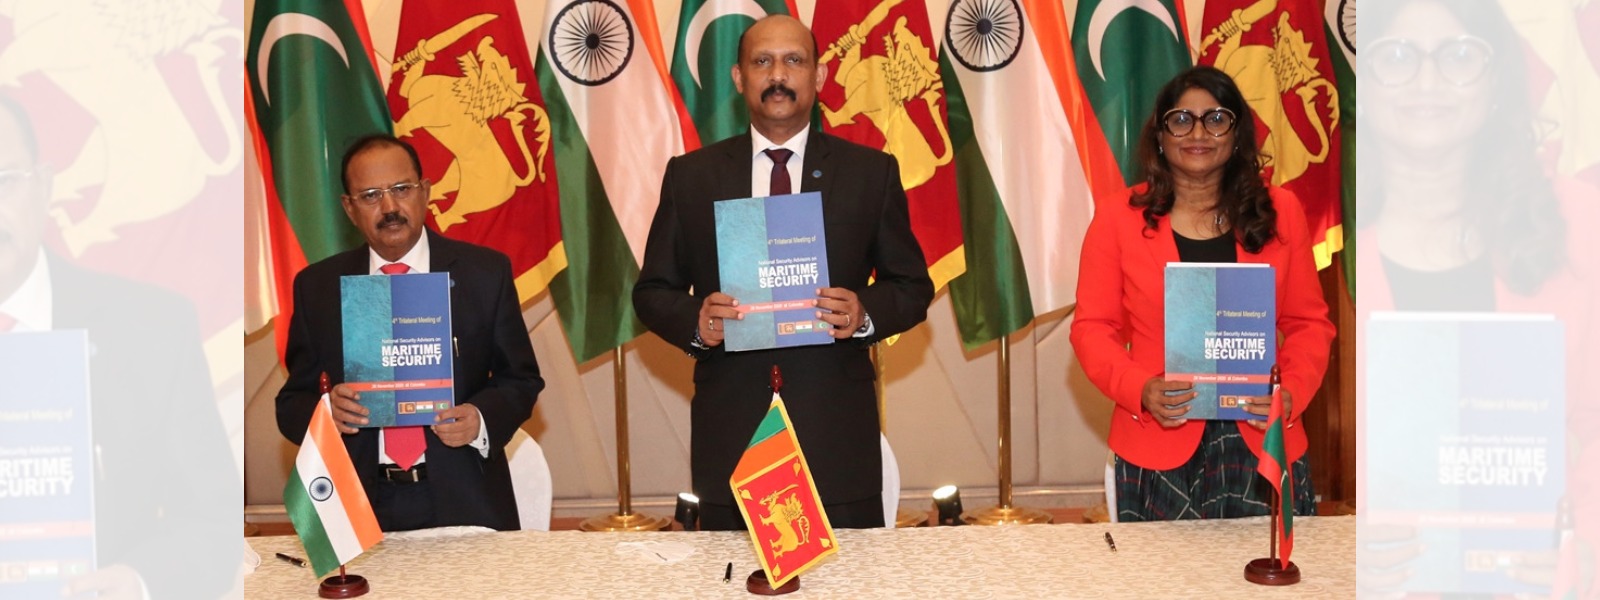 Sri Lanka, India & the Maldives agree to strengthen cooperation on Maritime Security